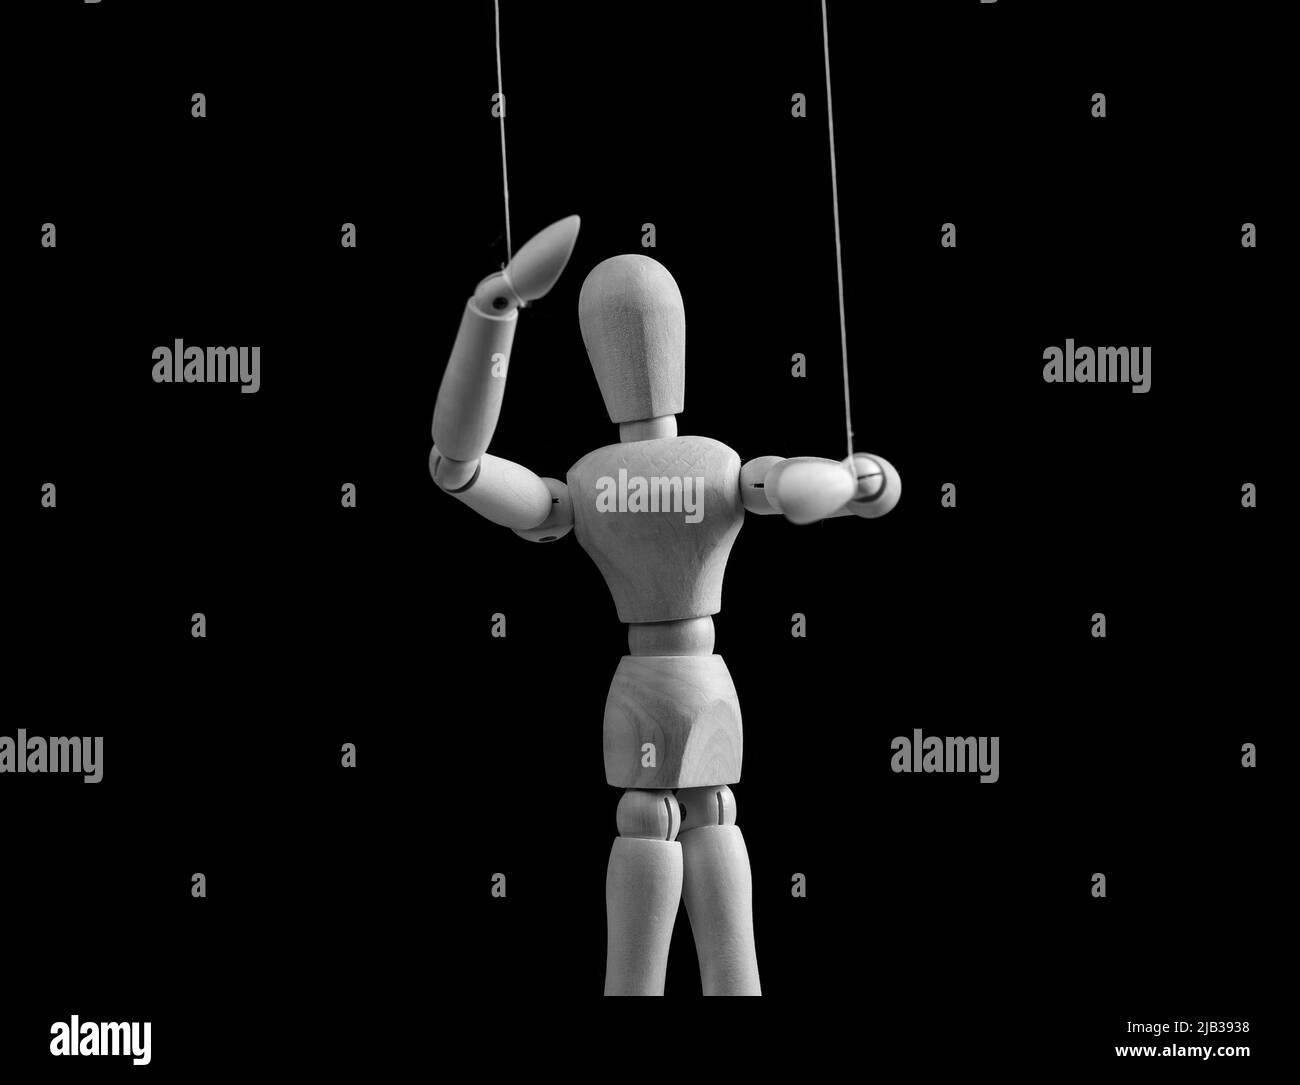 Puppet on strings. Exploit, control, abusive relationship concept. Alcohol, drug, gambling, internet addiction. Doll dependent on puppeteer. Black and white. High quality photo Stock Photo